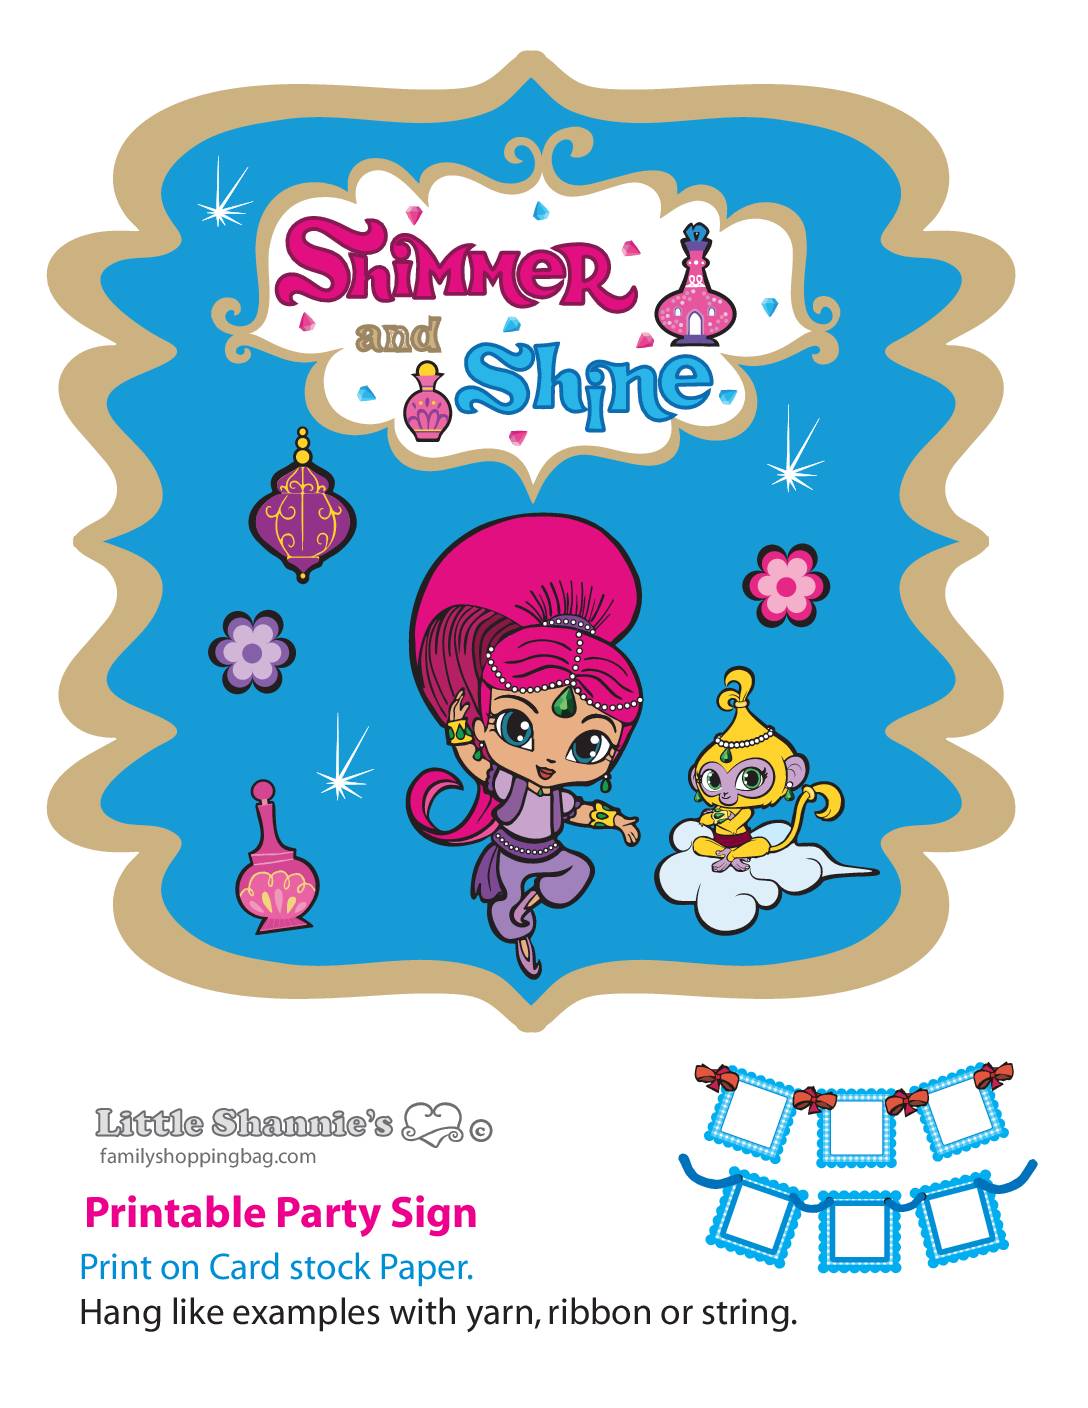 Banner Shimmer Party Banners